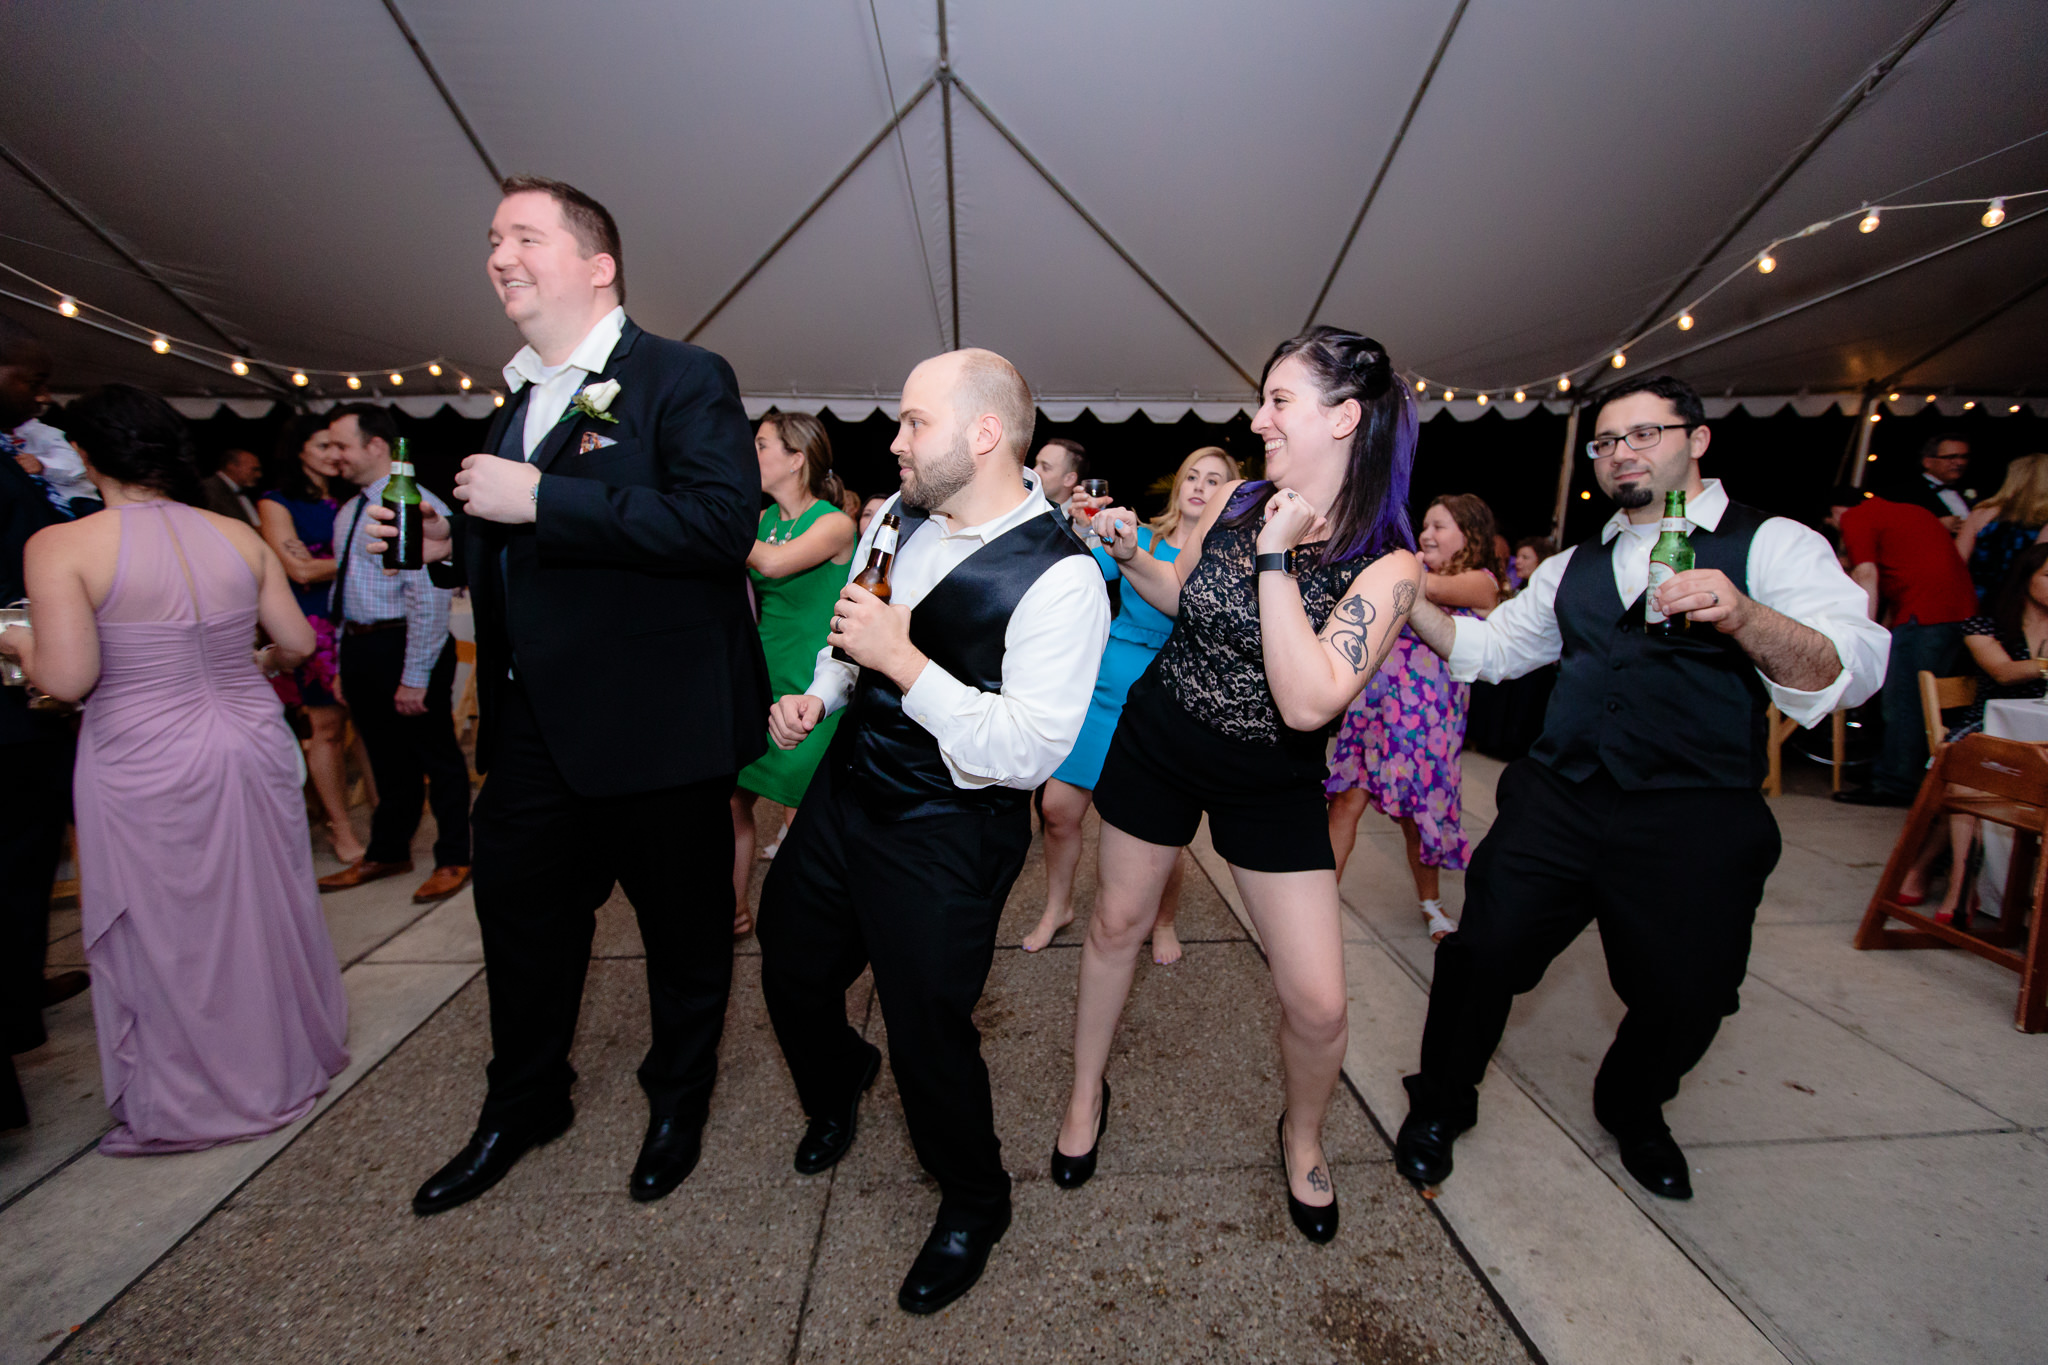 Guests dance at a tented wedding reception at the National Aviary